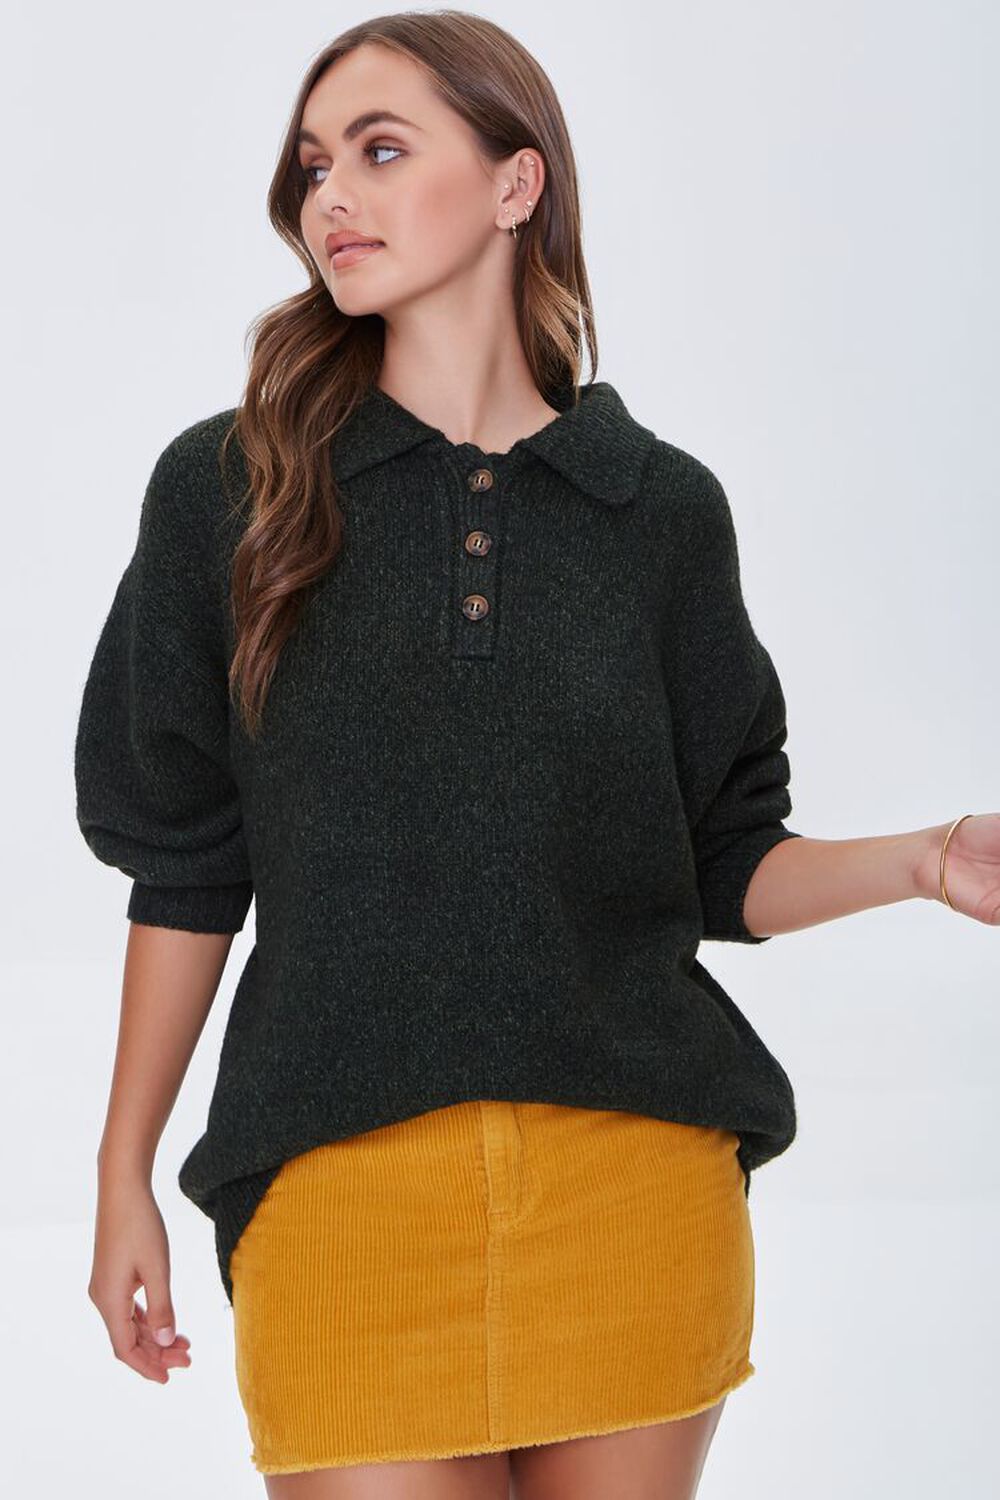 OLIVE Marled Half-Buttoned Sweater, image 1